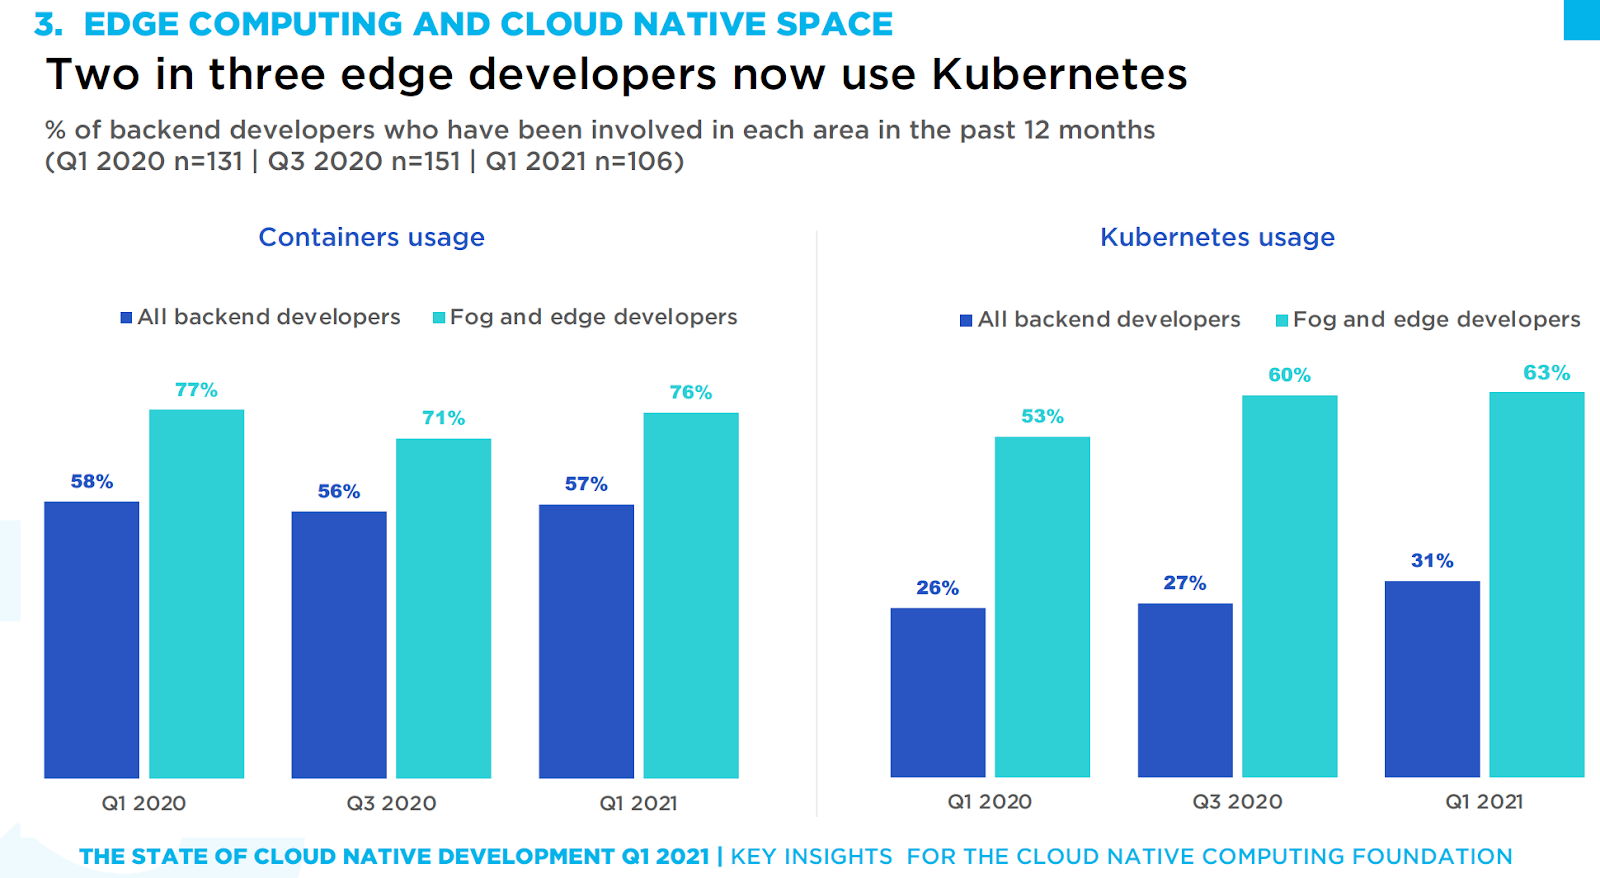 Bar charts showing percentage of backend developers using Containers and Kubernetes in Q1 2020, Q3 2020 and Q1 2021